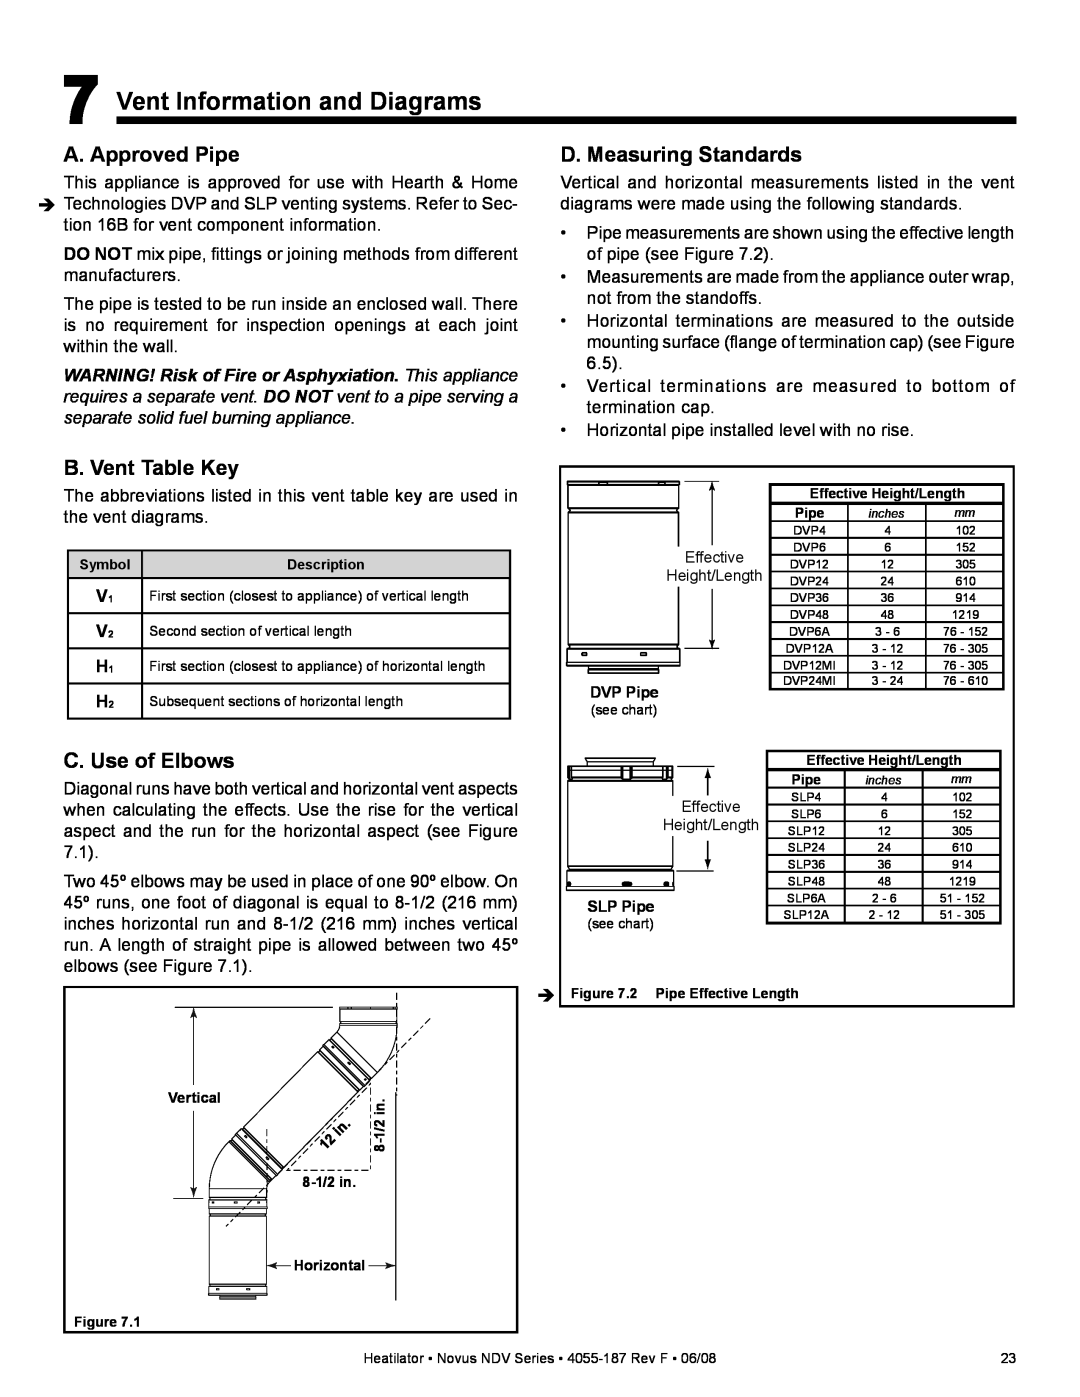 Hearth and Home Technologies NDV4842L, NDV4236IL Vent Information and Diagrams, A. Approved Pipe, D. Measuring Standards 